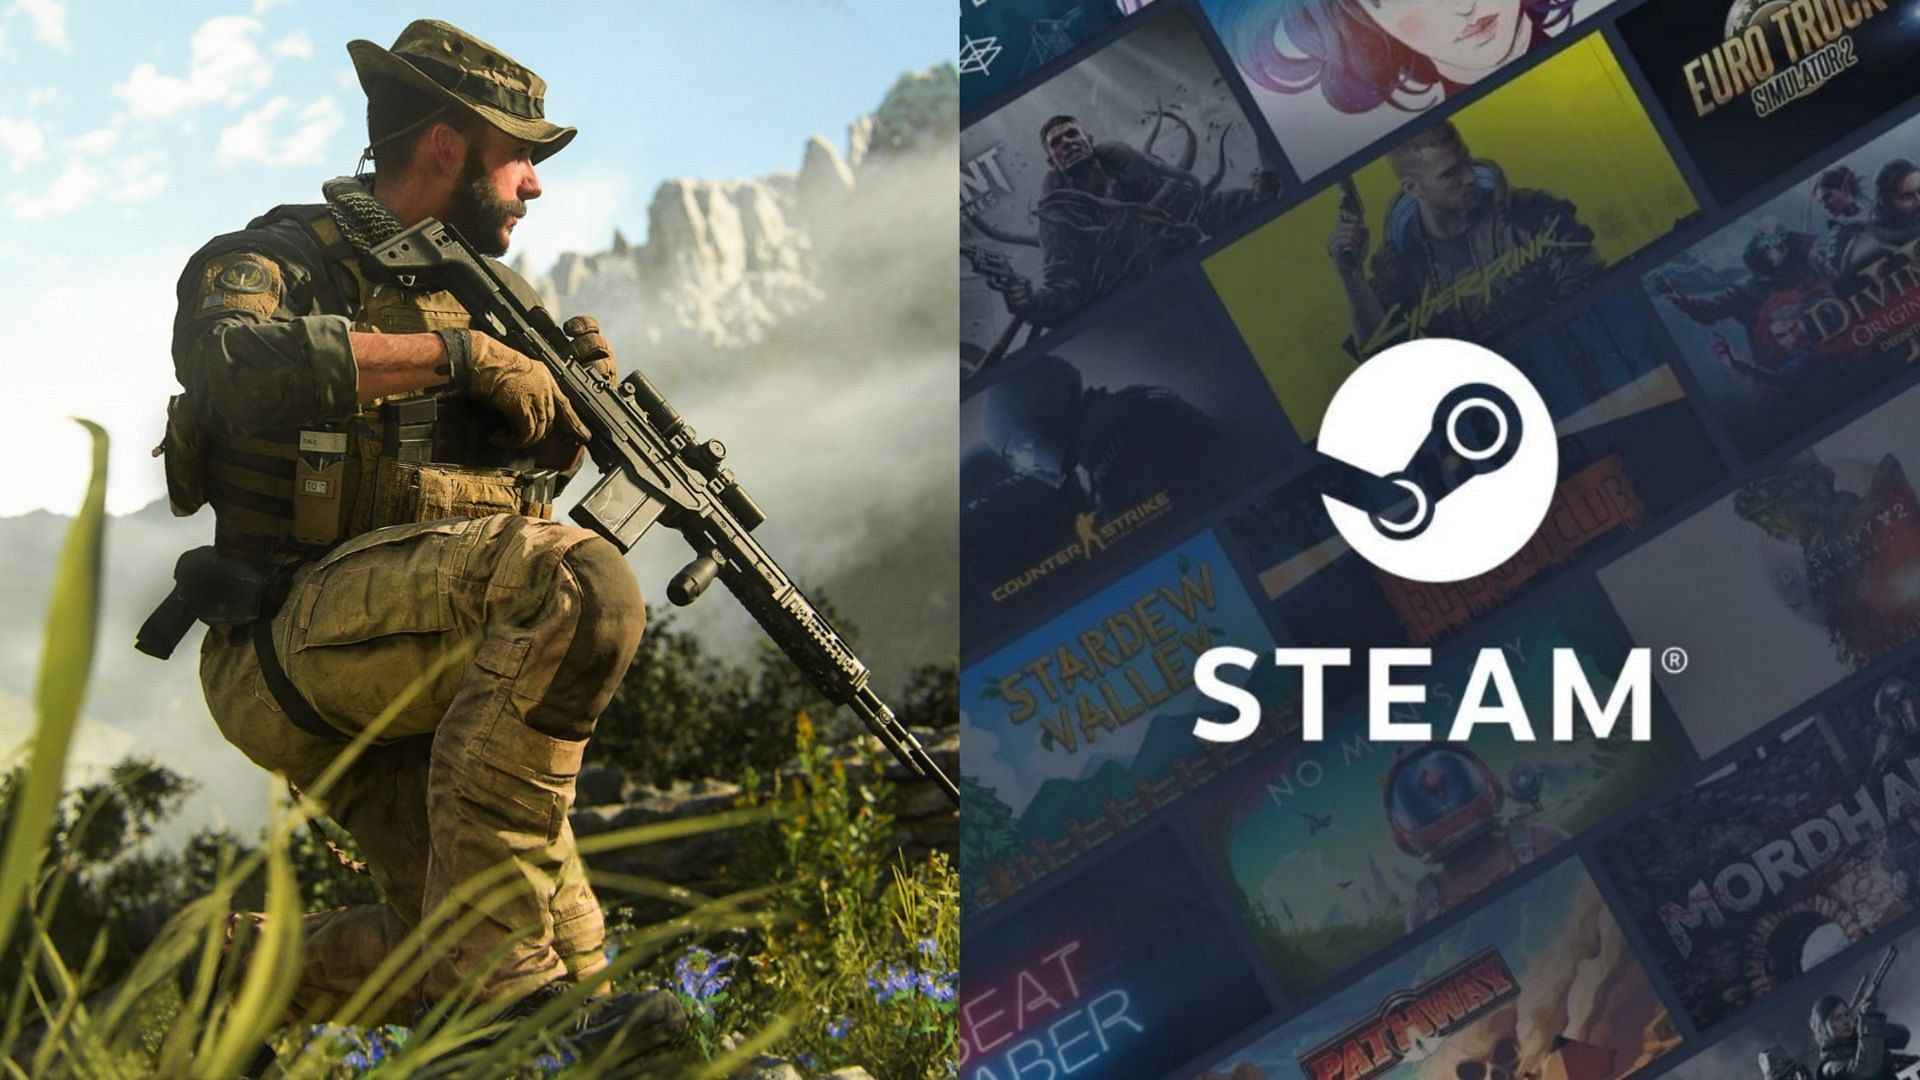 Captain Price from MW3 on the left and Steam logo on the right